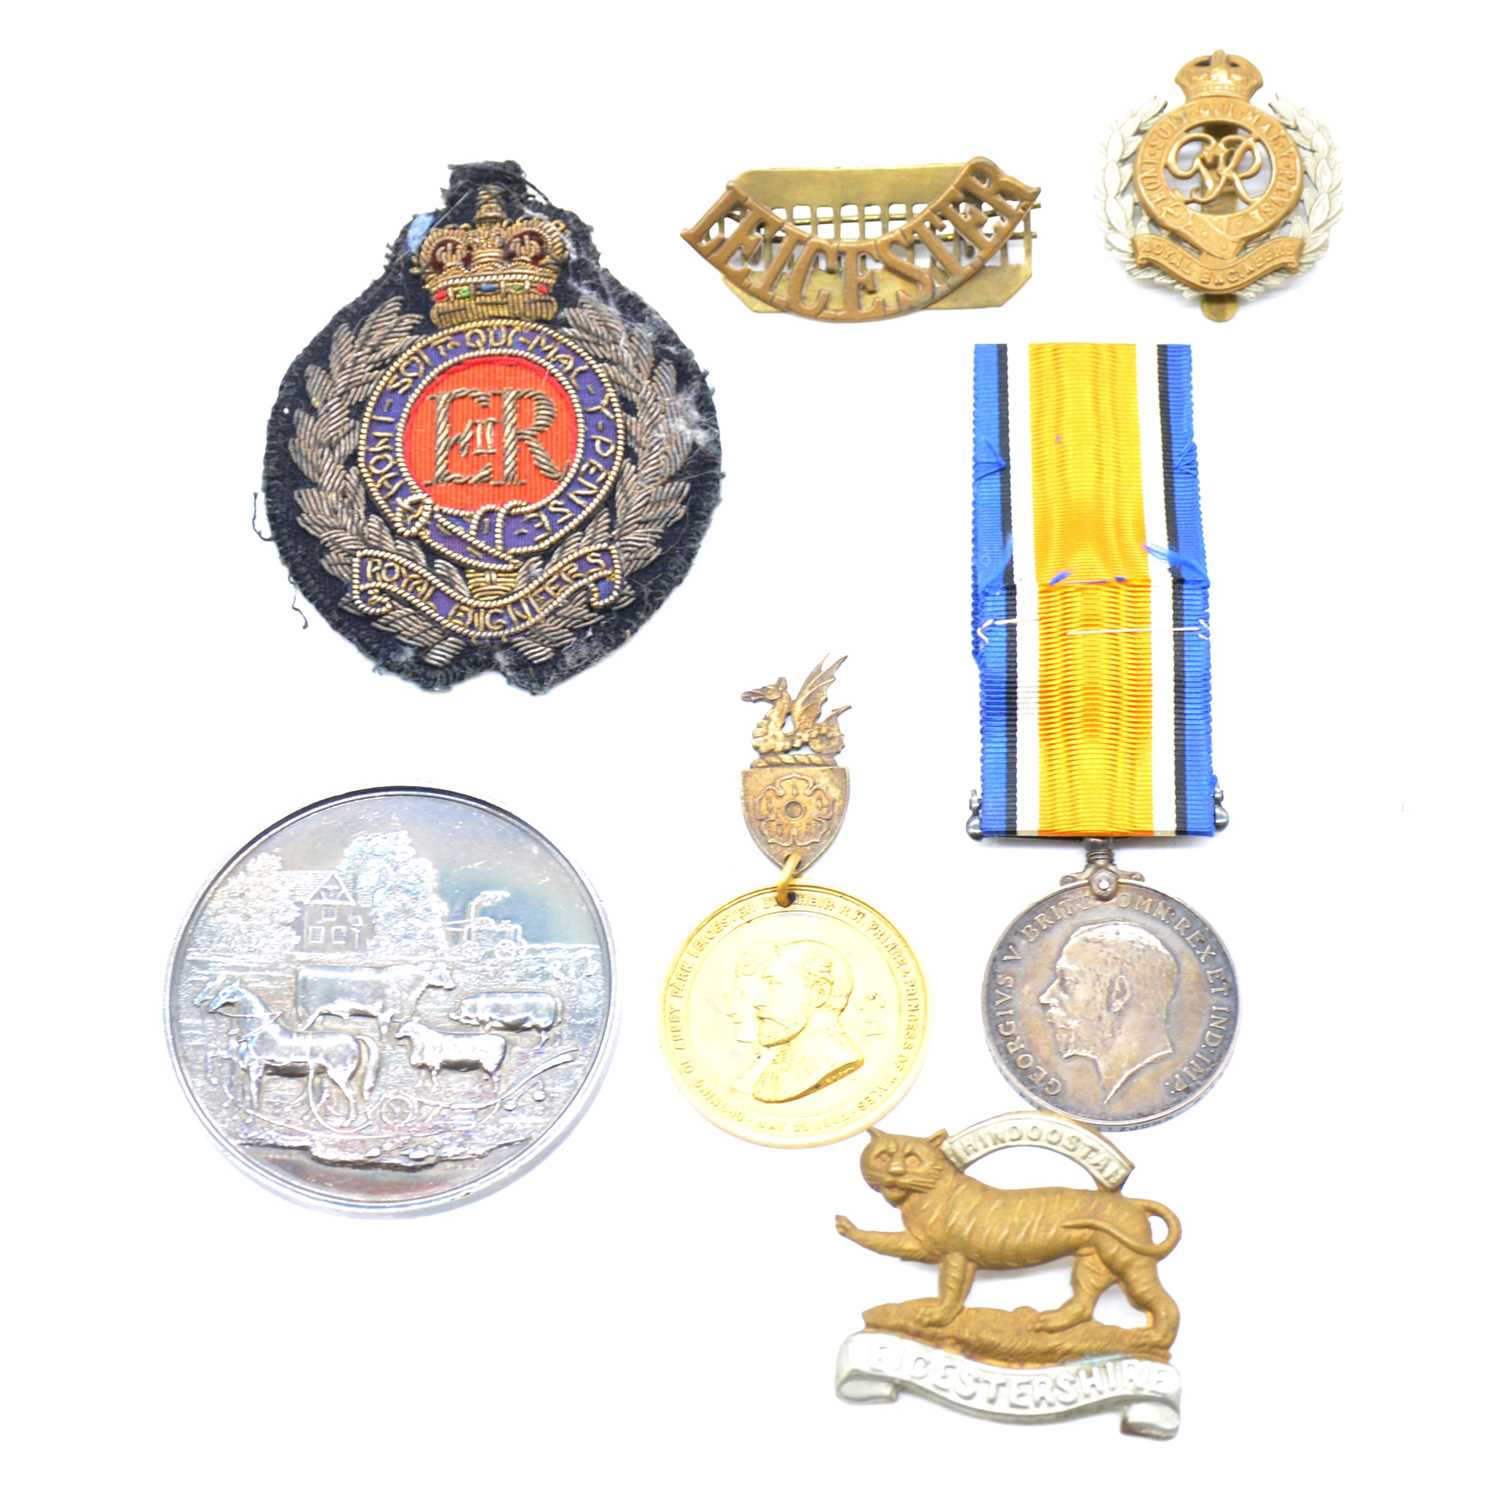 A WWI Service Medal, military buttons and badges, Abbey Park, Thomas Ottley Agricultural medal.